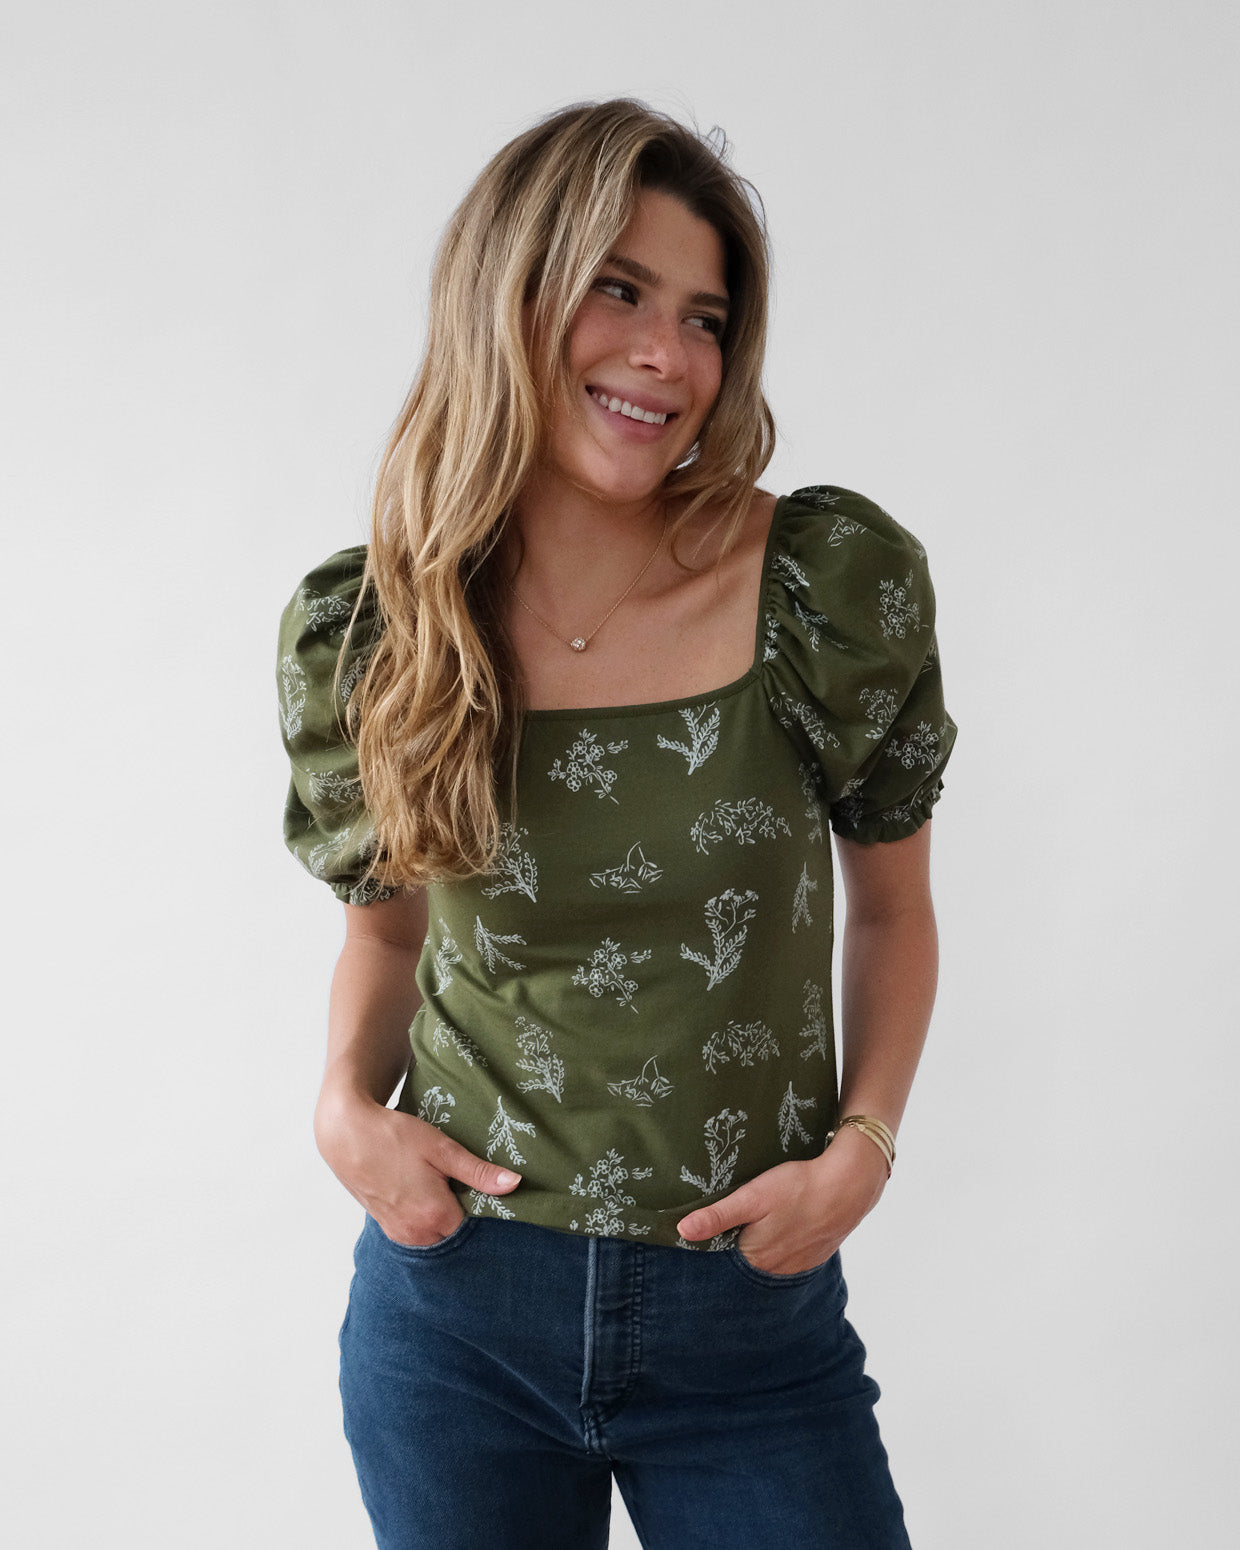 PETUNIA printed top in Olive/White